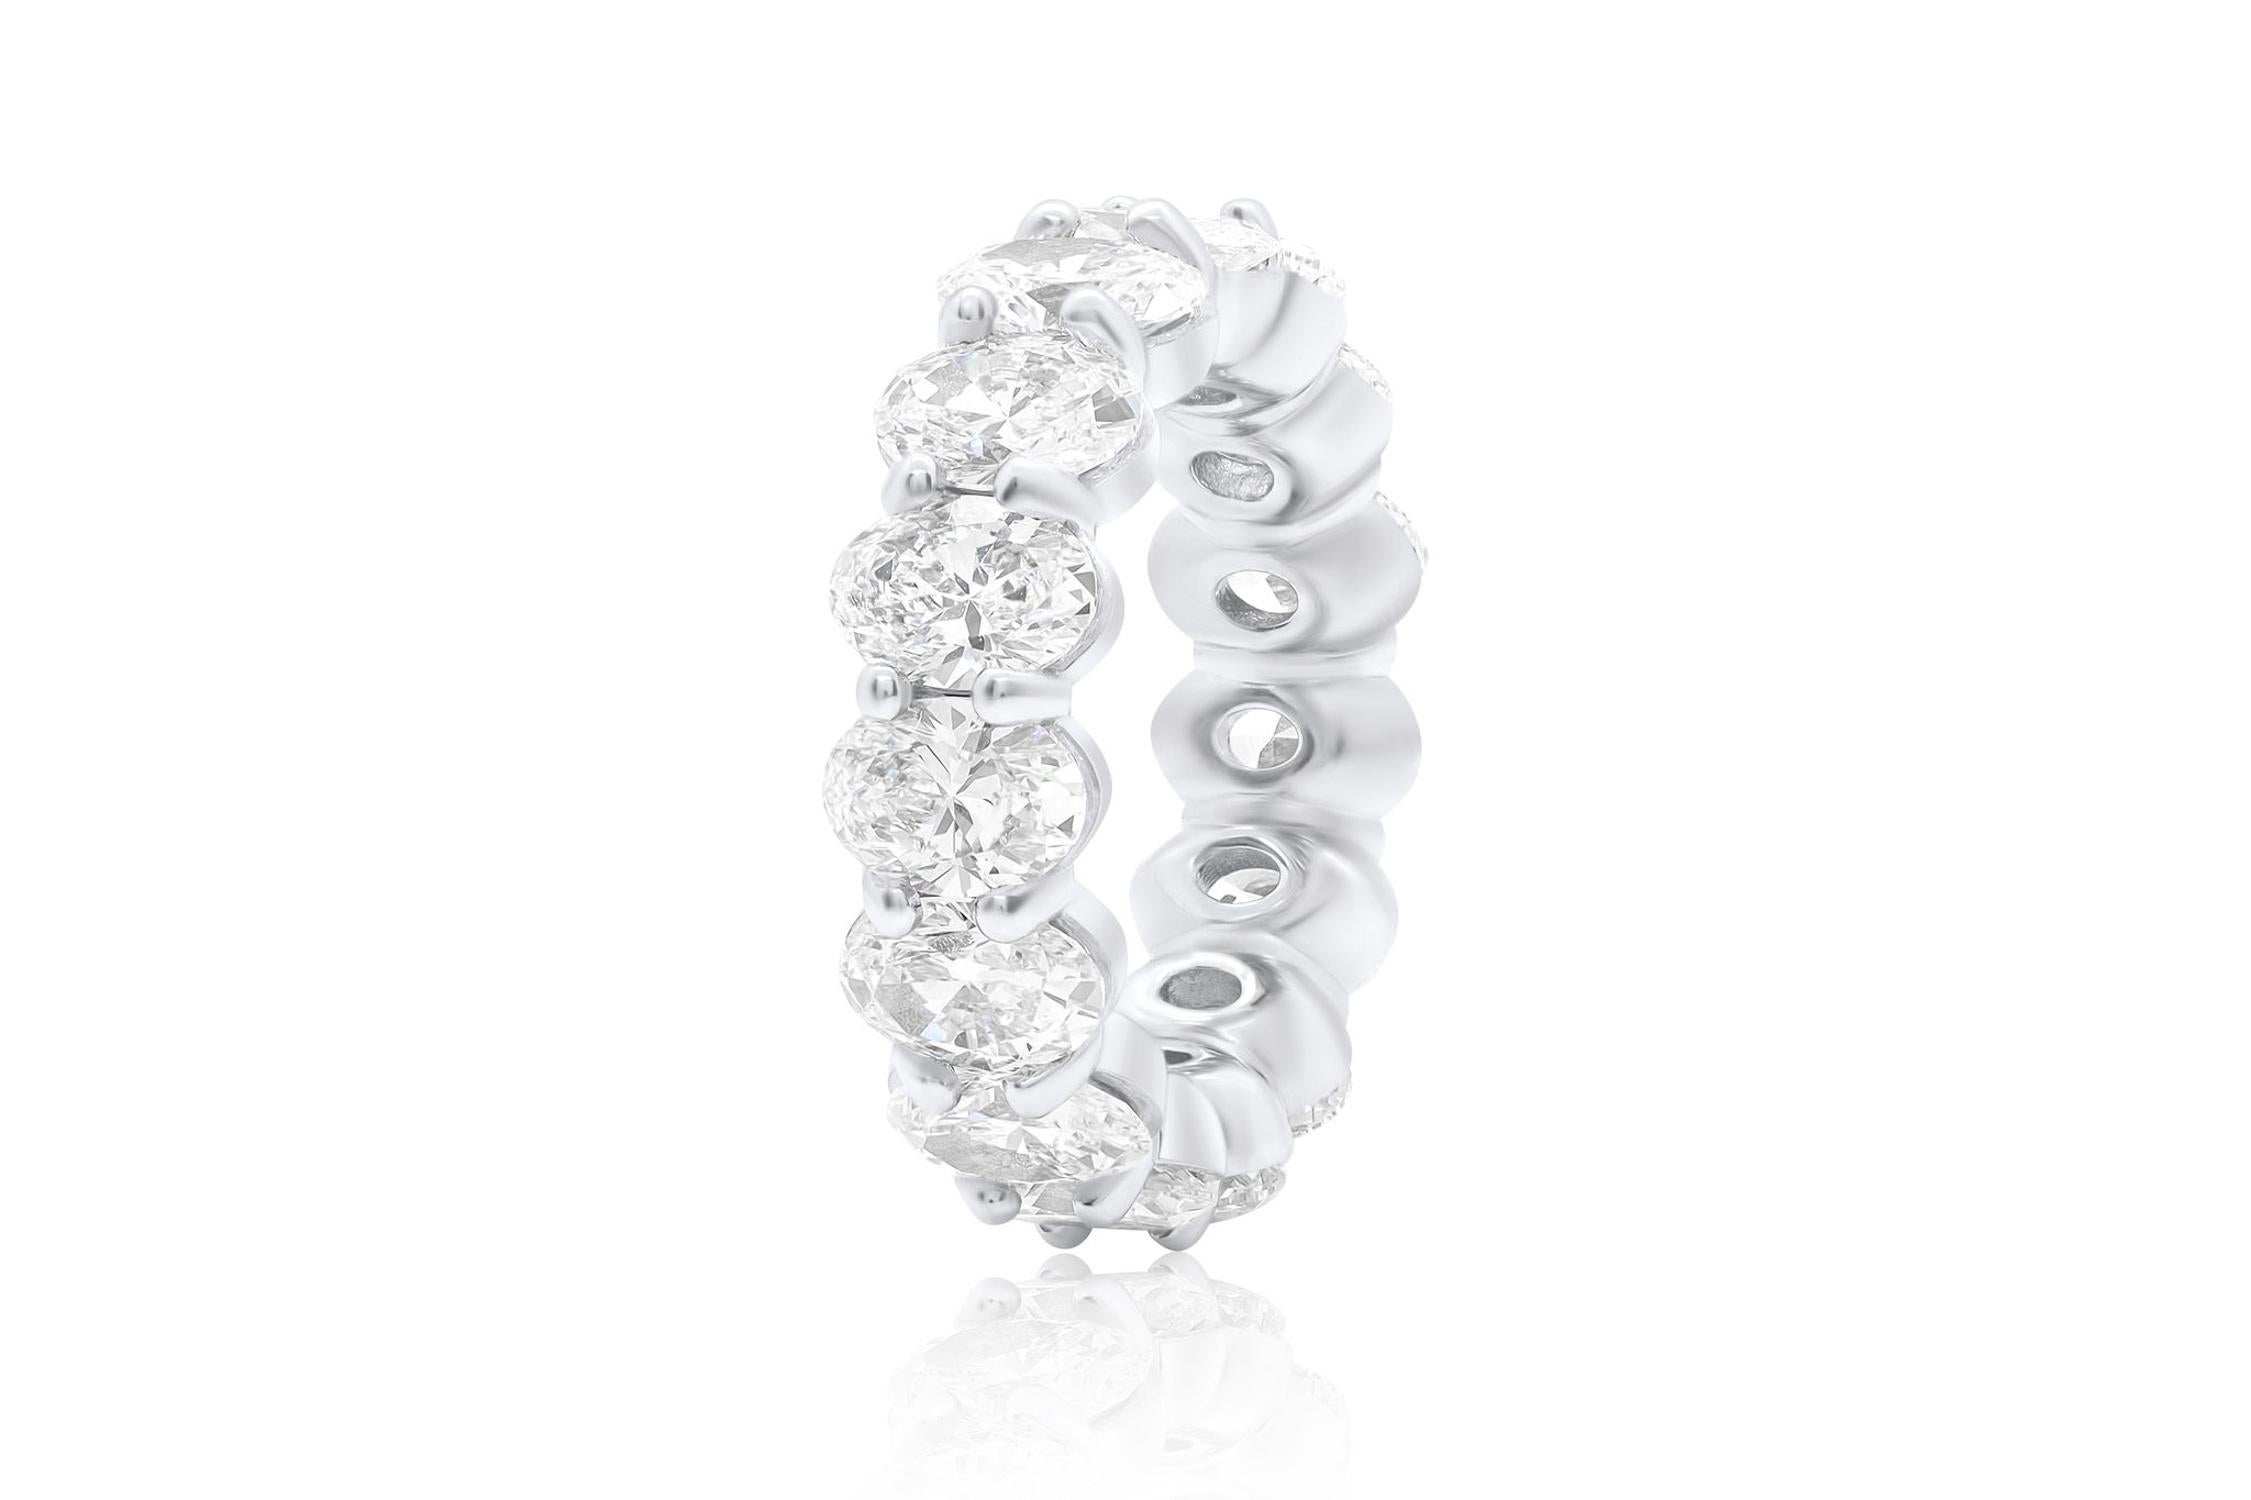 PLATINUM WENDDING BAND 18 STONES TOTAL 6.15CTS  OVAL SHAPE DIAMONDS
Diana M. is a leading supplier of top-quality fine jewelry for over 35 years.
Diana M is one-stop shop for all your jewelry shopping, carrying line of diamond rings, earrings,